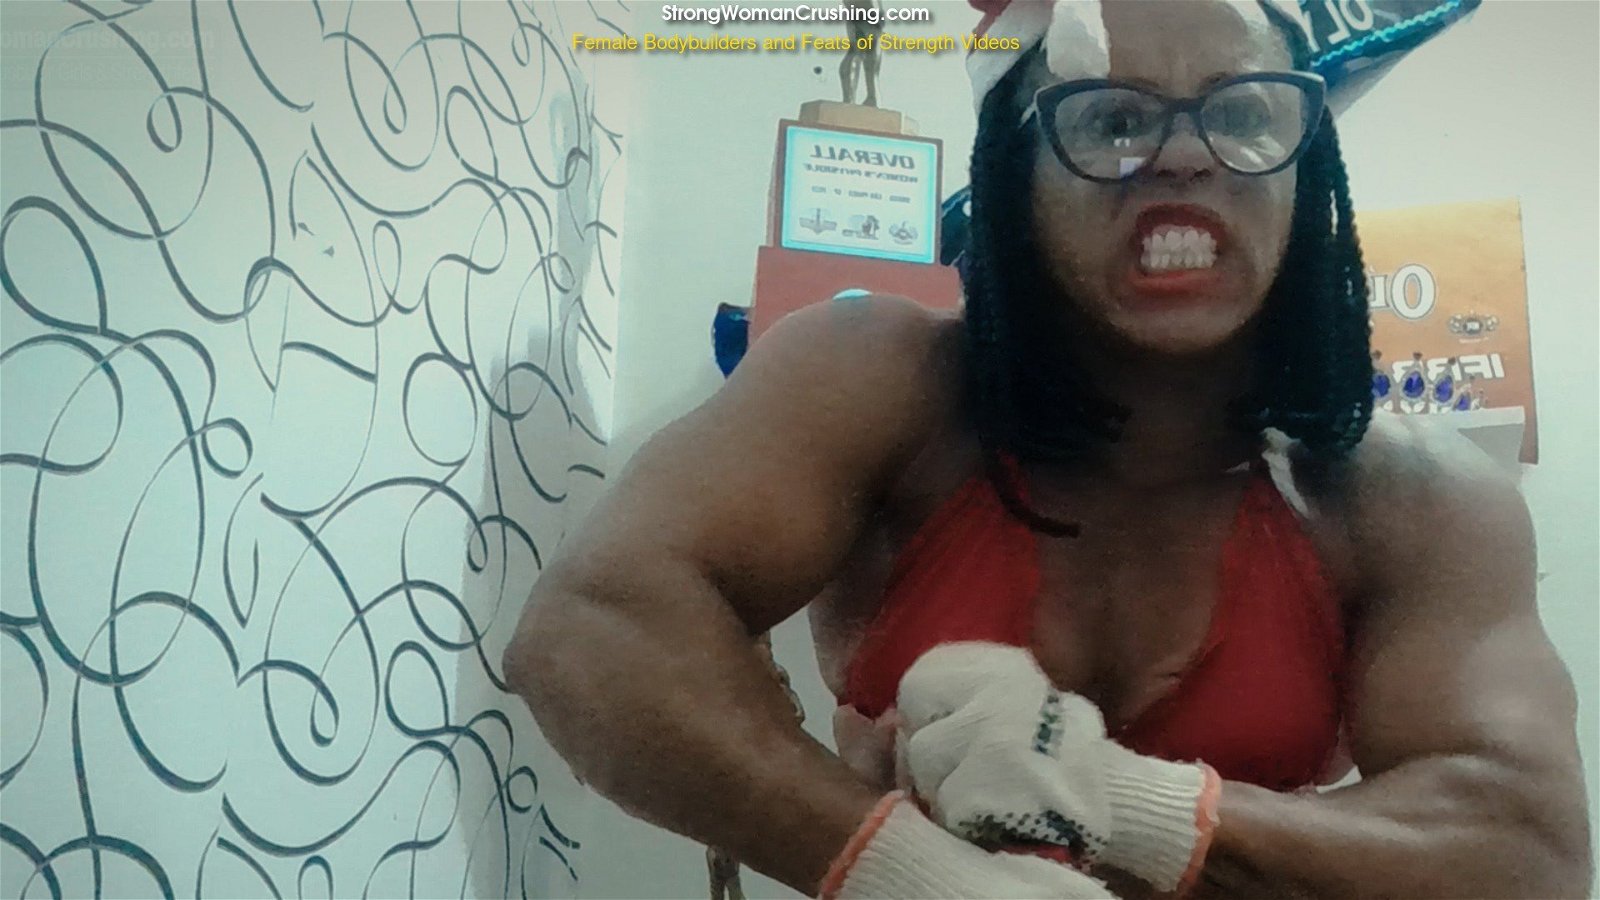 Photo by MusclegirlStrength with the username @MusclegirlStrength, who is a brand user,  April 15, 2024 at 7:04 AM and the text says 'Muscle Goddess Marta Crushes Christmas Toys with Power!: StrongWomanCrushing.com

#musclegirl #musclegirllove #femalemuscle #femalemuscles #featsofstrength #MuscleCrushMonday #PowerfulWomen #DestroyingLimits'